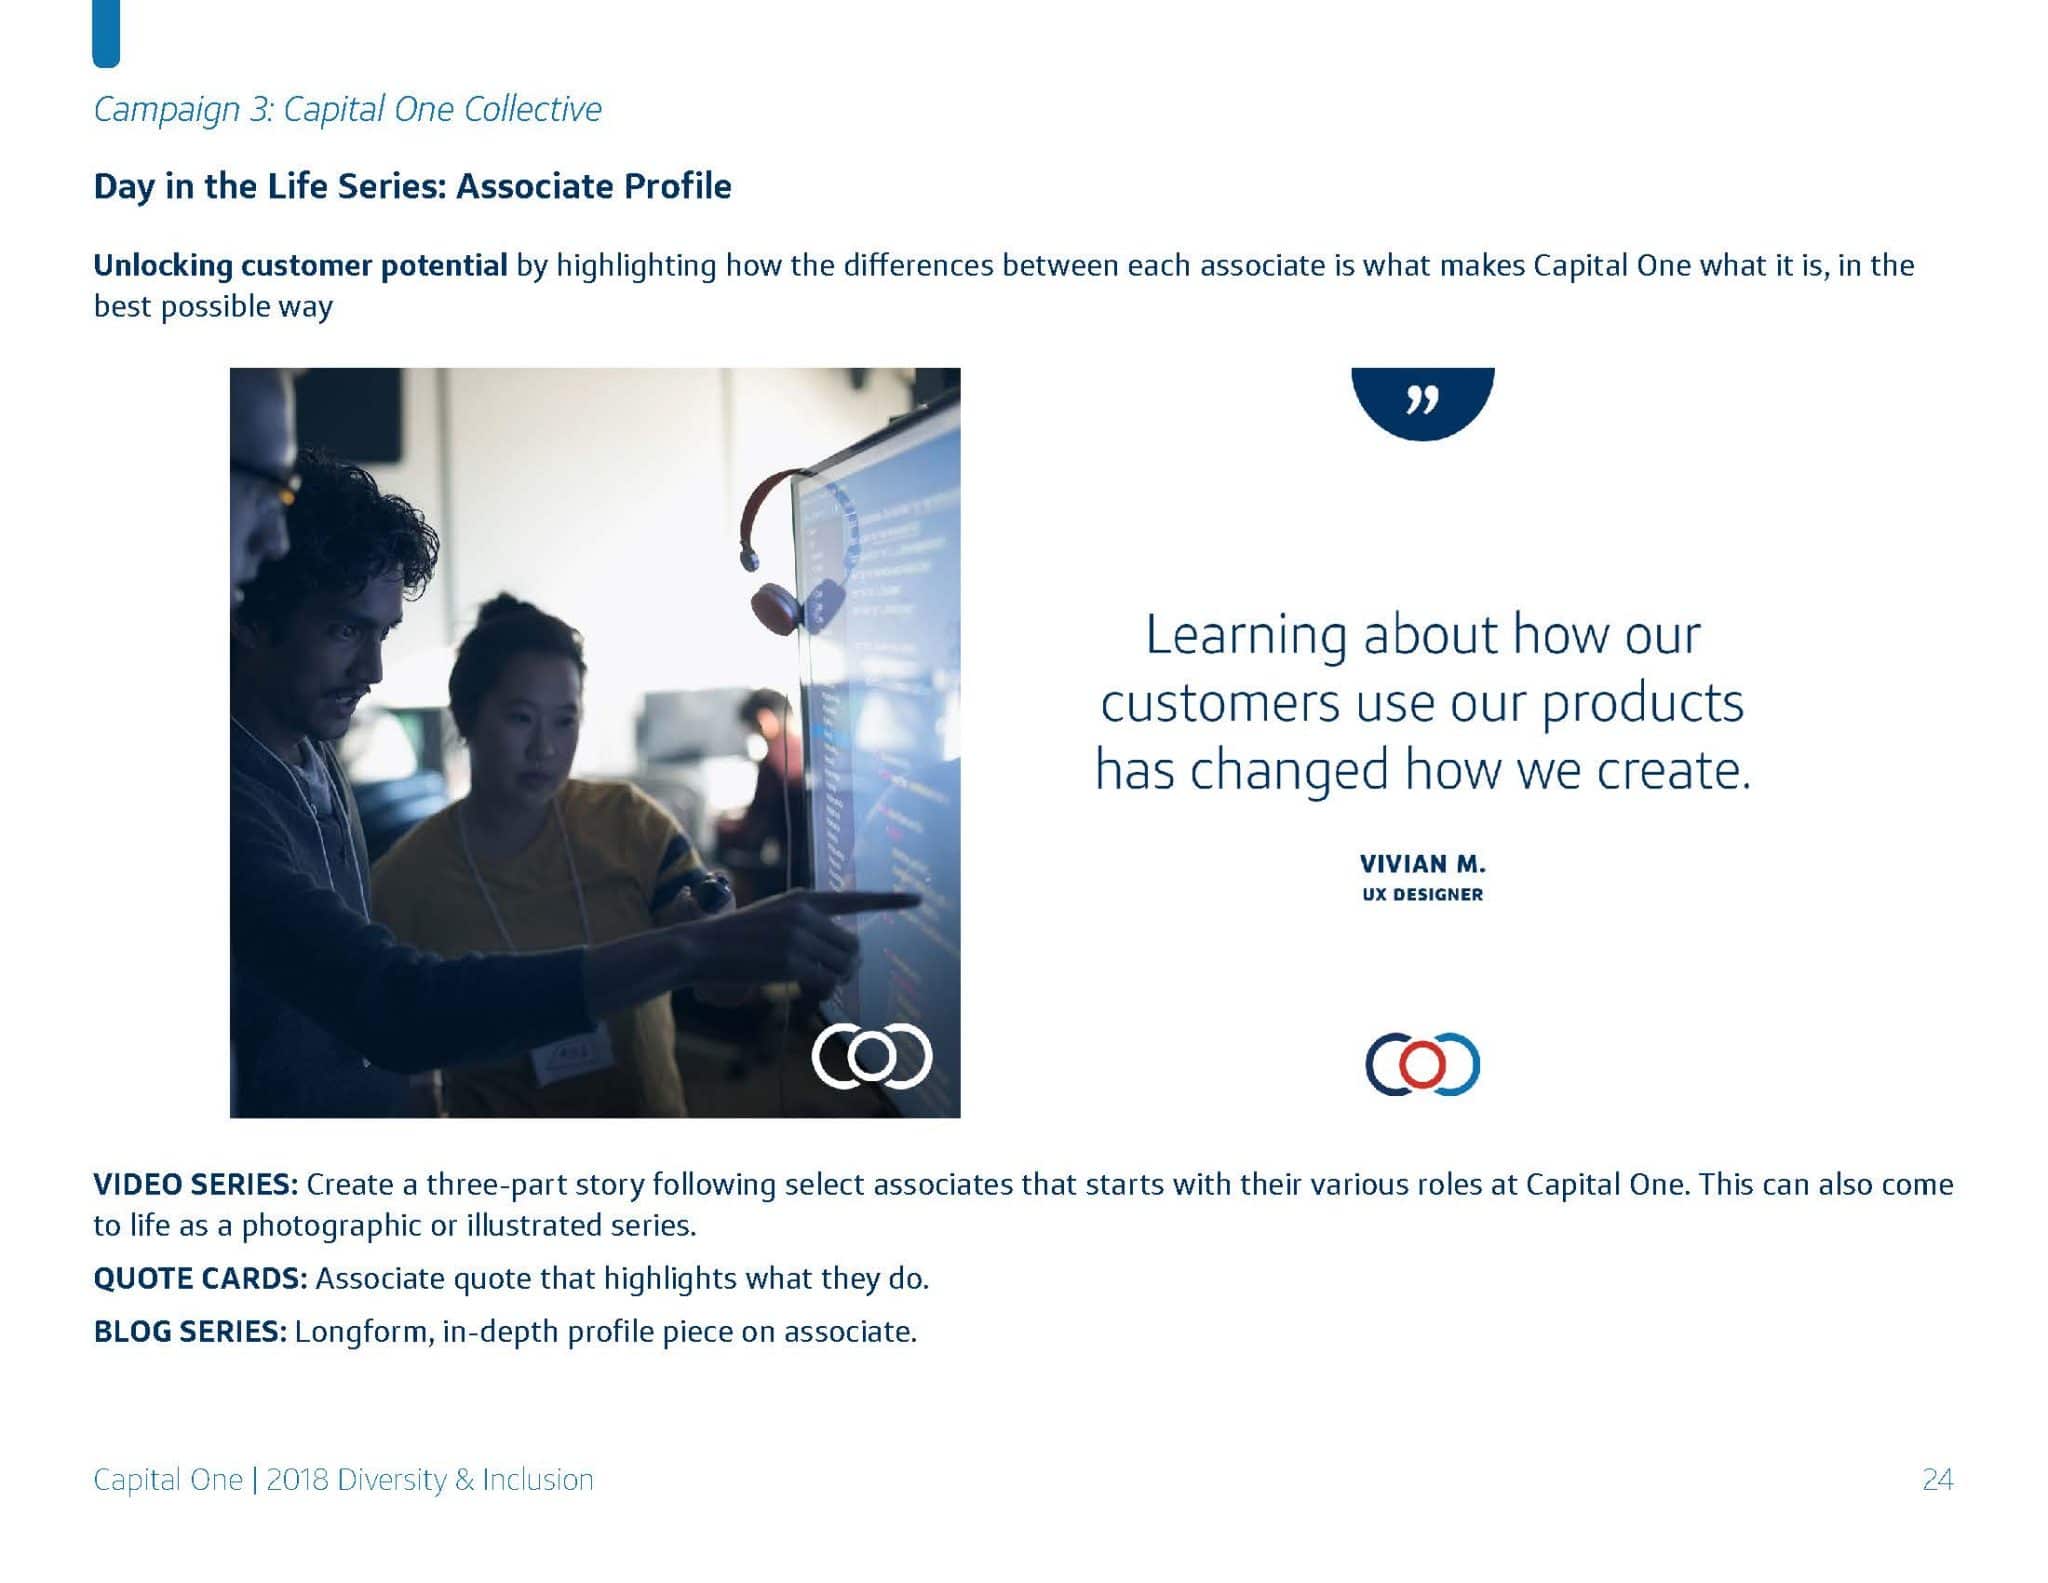 Art Direction & Design for Capital One Social Campaign